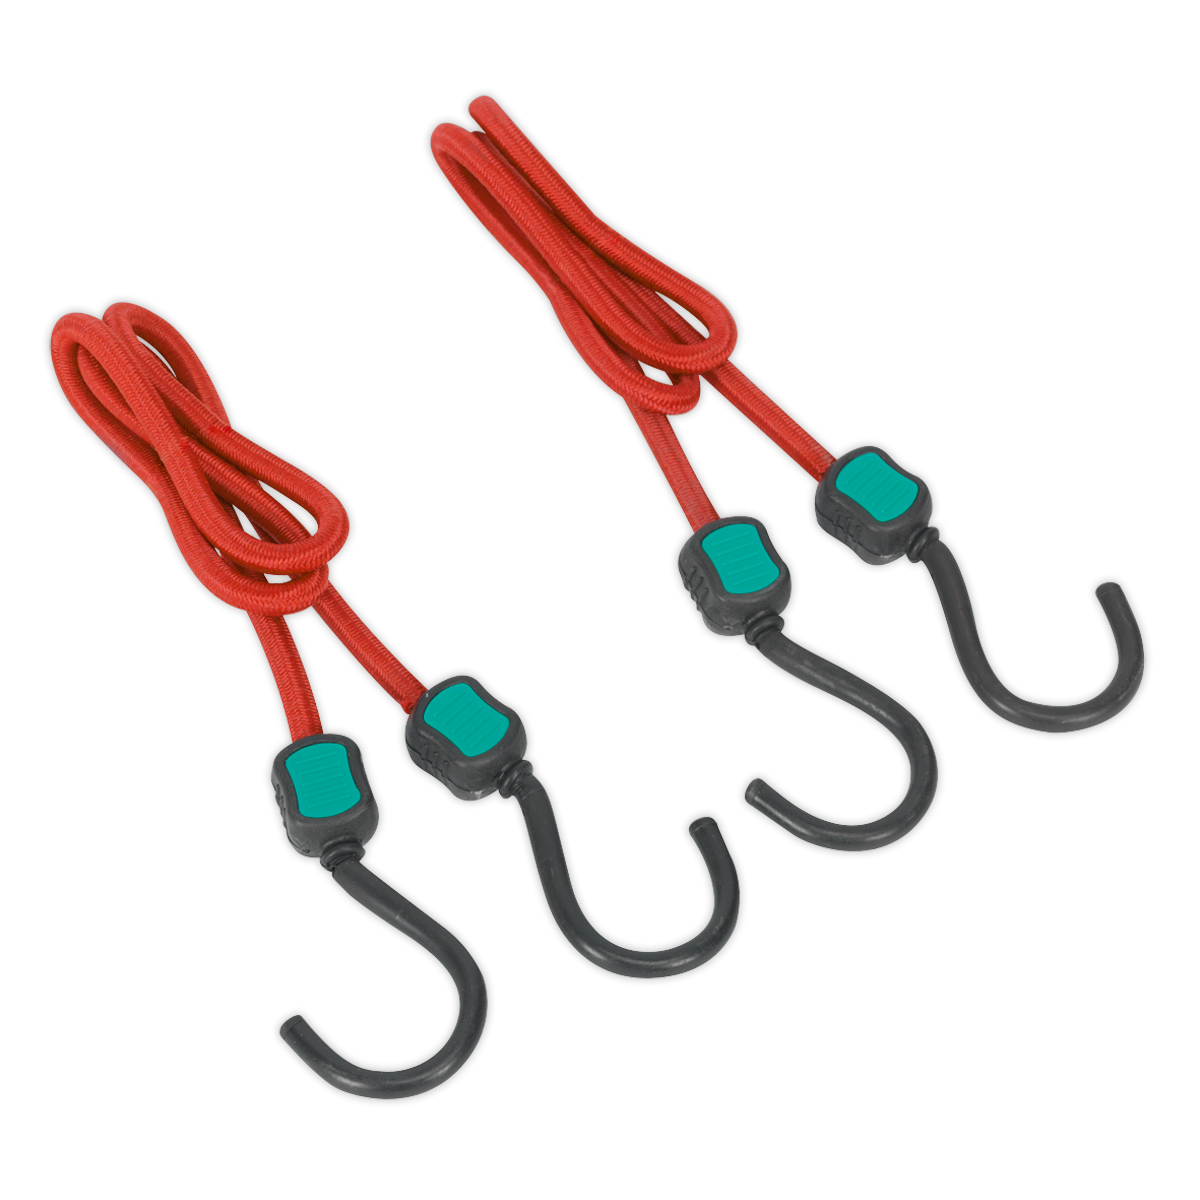 Bungee Cord Set 2pc 760mm